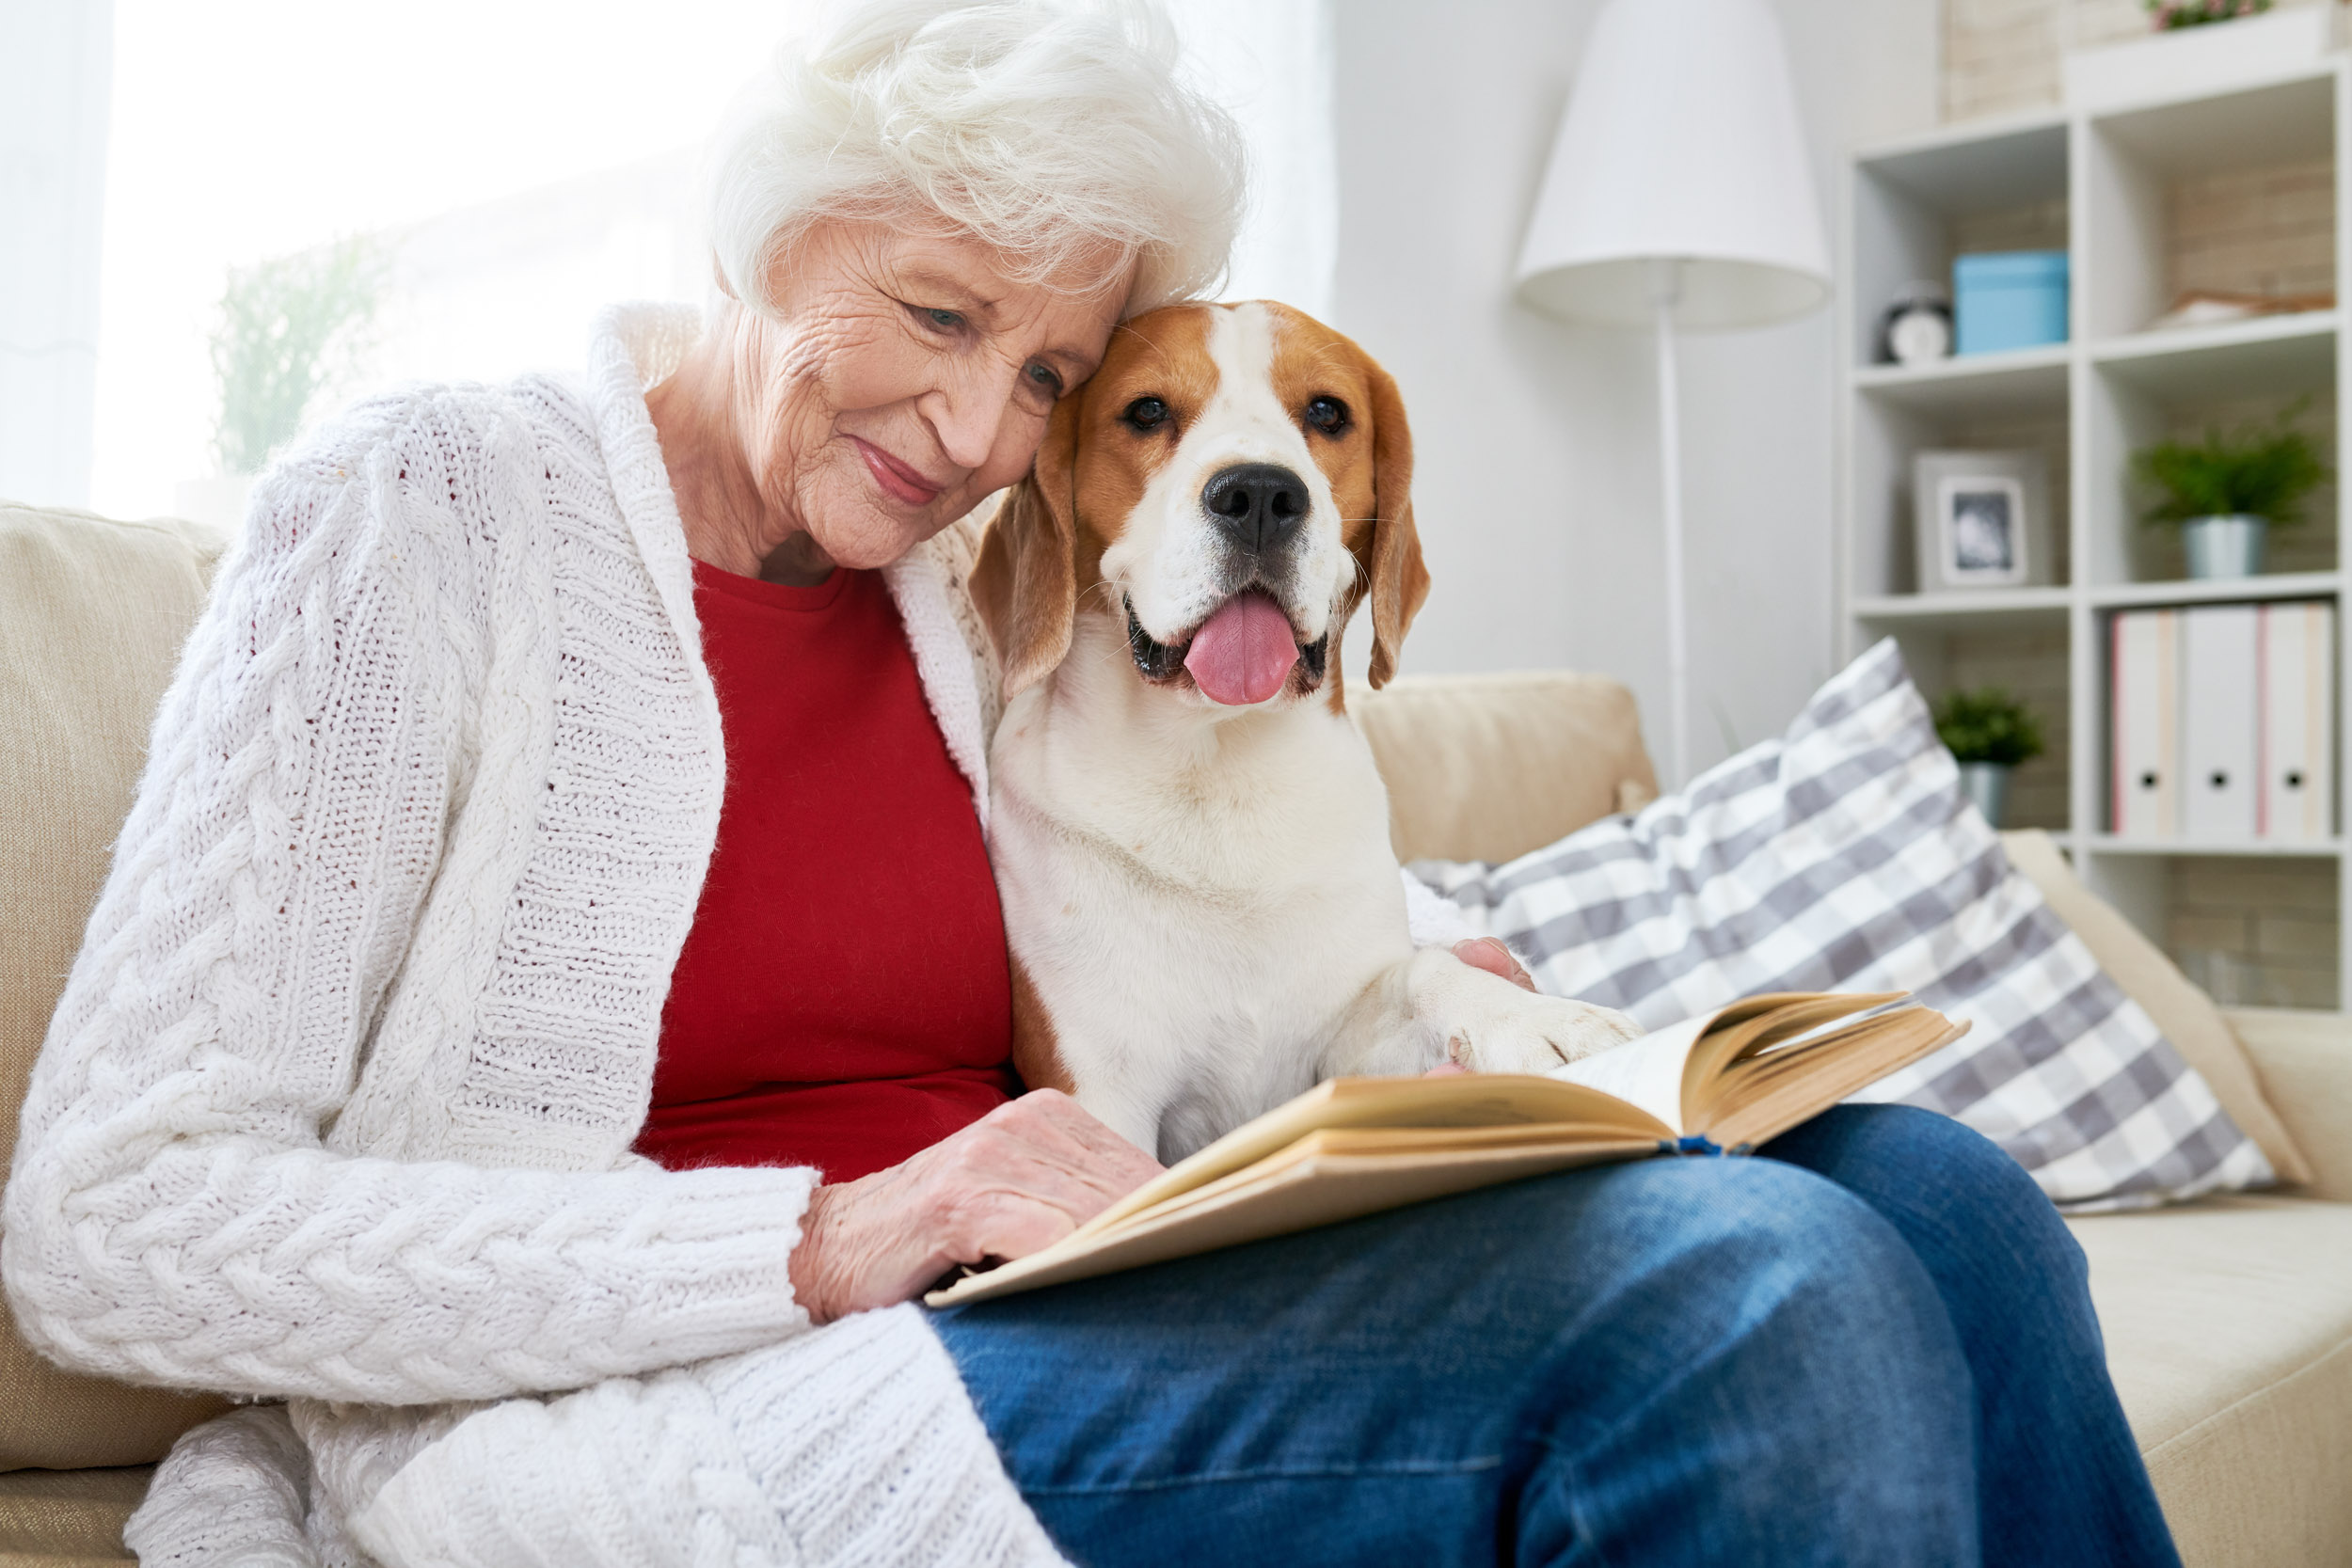 Smiling senior woman reading book with dog